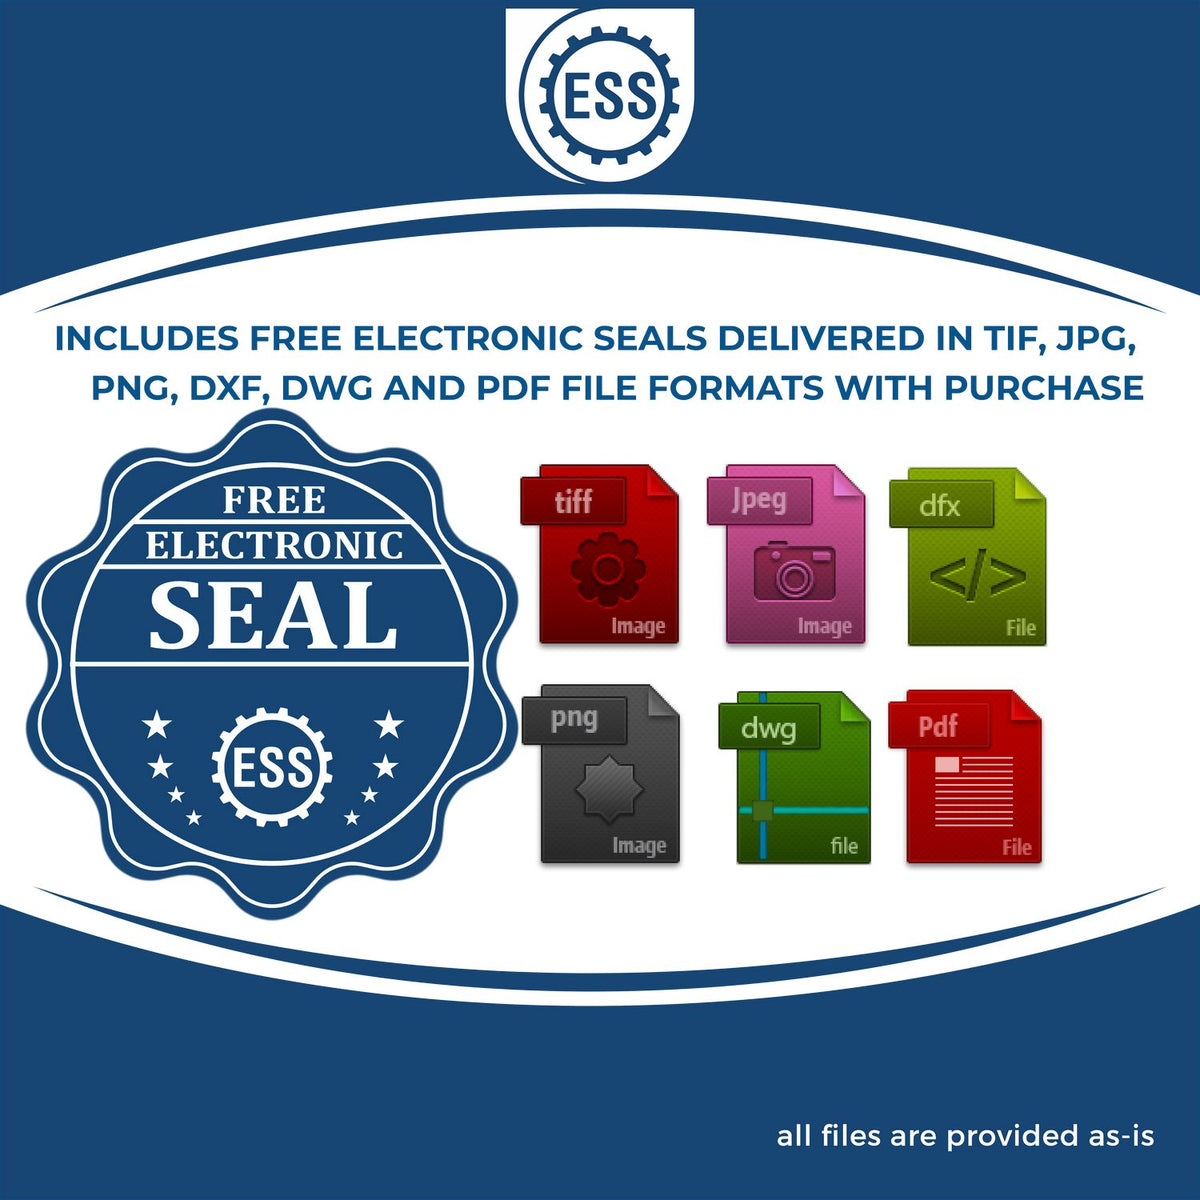 An infographic for the free electronic seal for the Gift Guam Engineer Seal illustrating the different file type icons such as DXF, DWG, TIF, JPG and PNG.